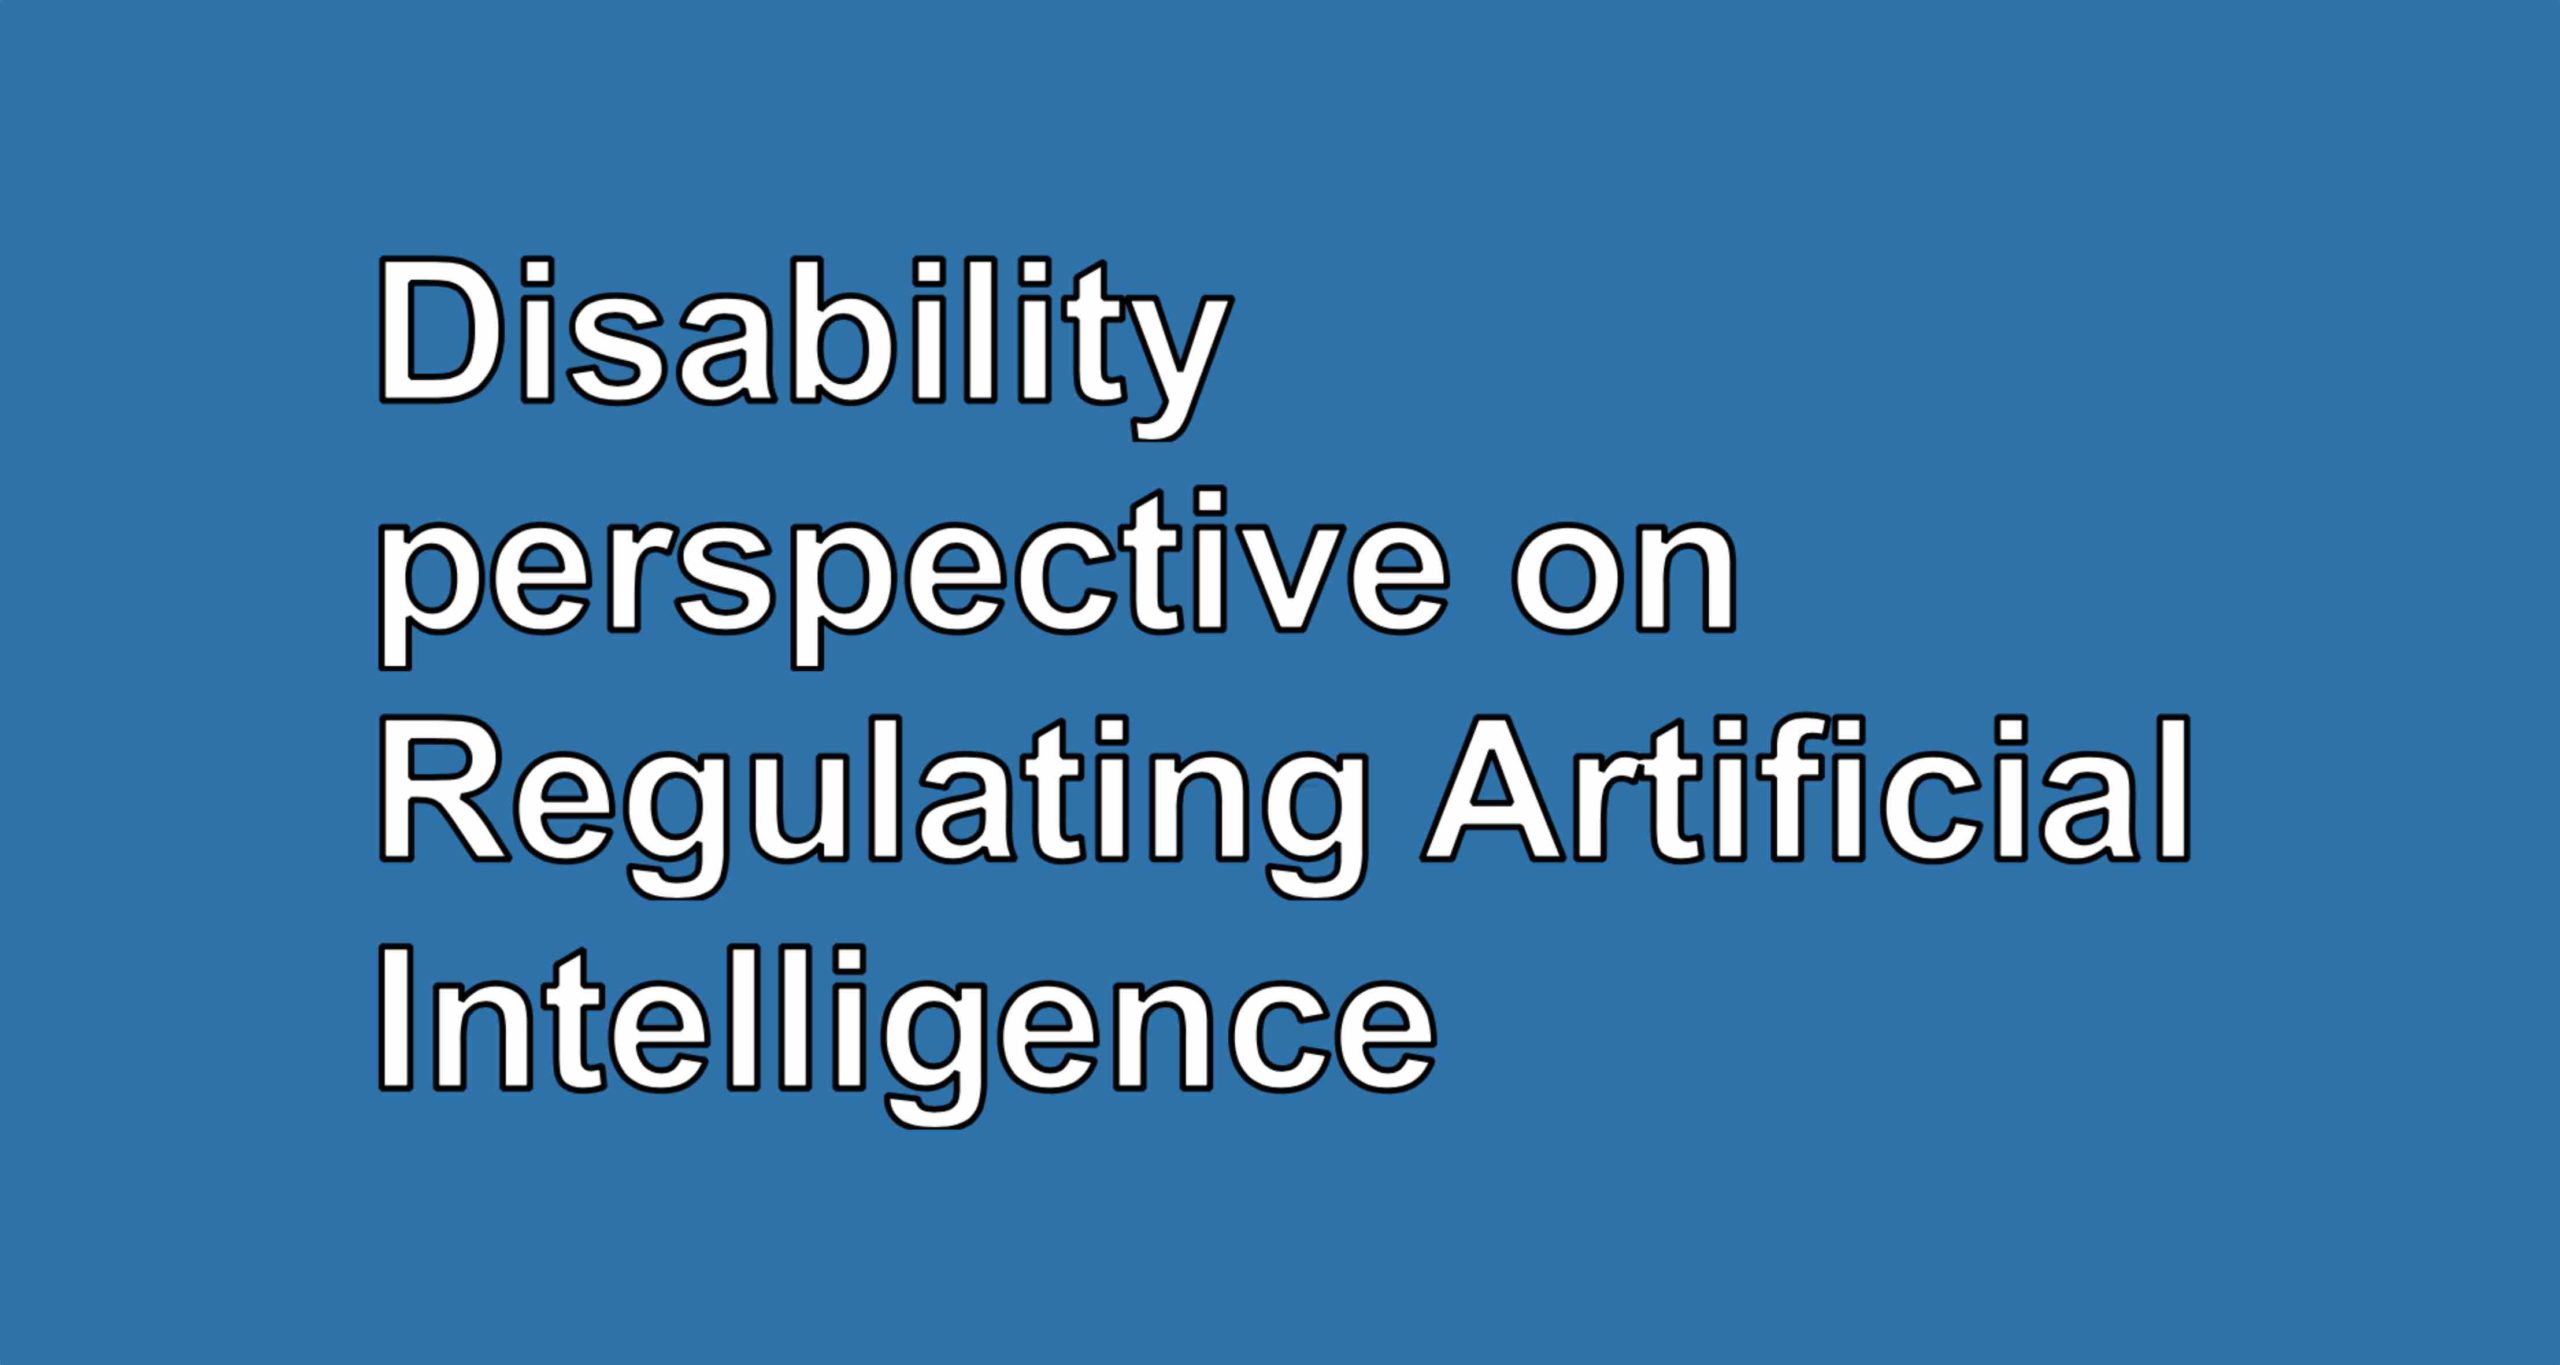 European Disability Forum (EDF) Position Paper on EU proposal for regulating Artificial Intelligence